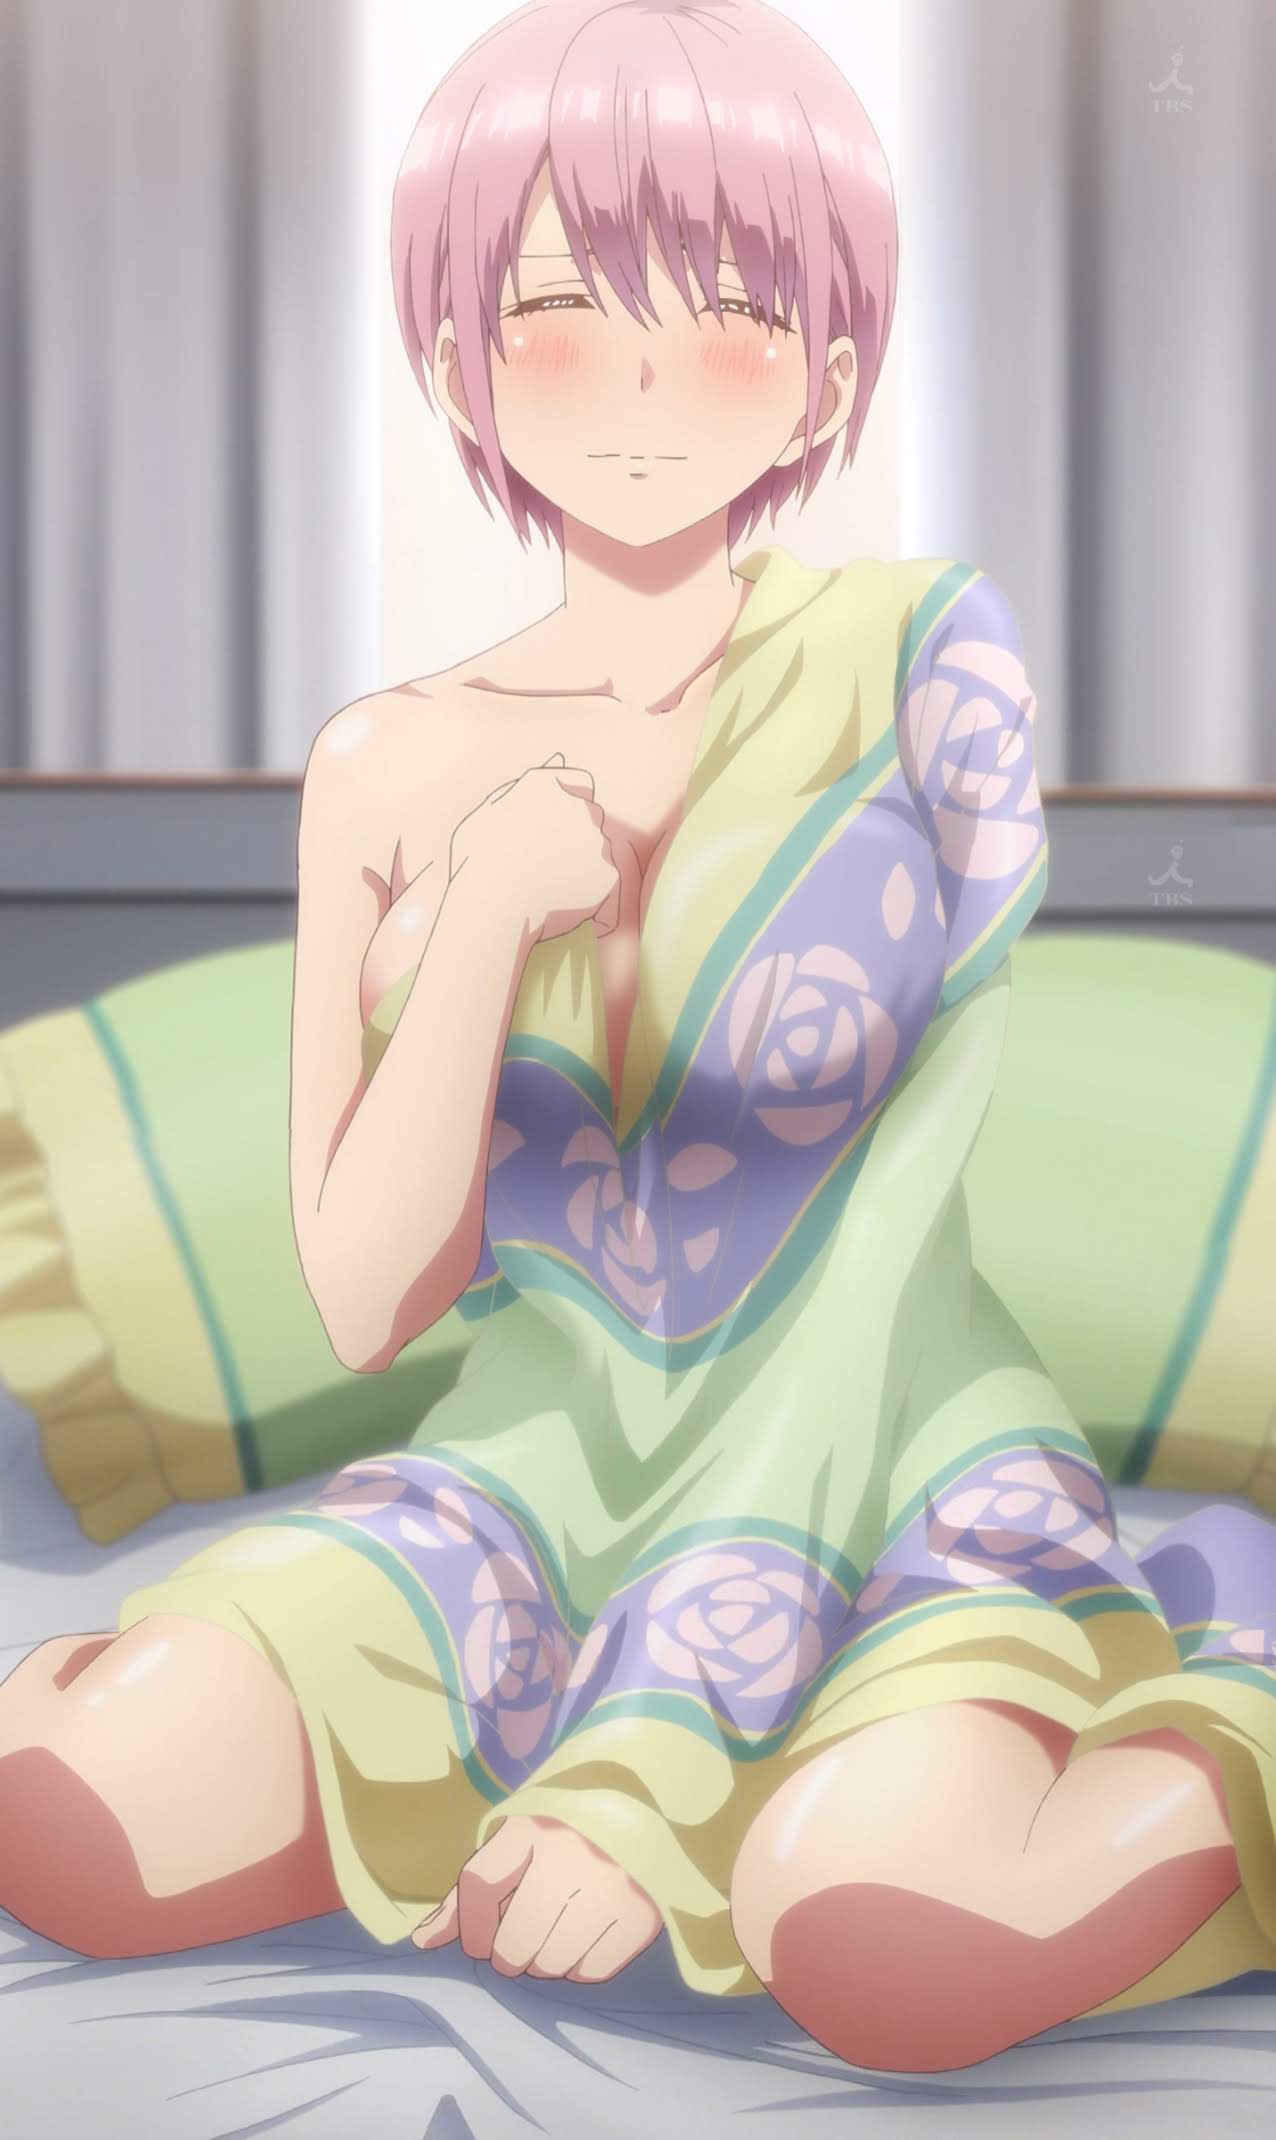 basil benny reccomend The Quintessential Quintuplets Naked